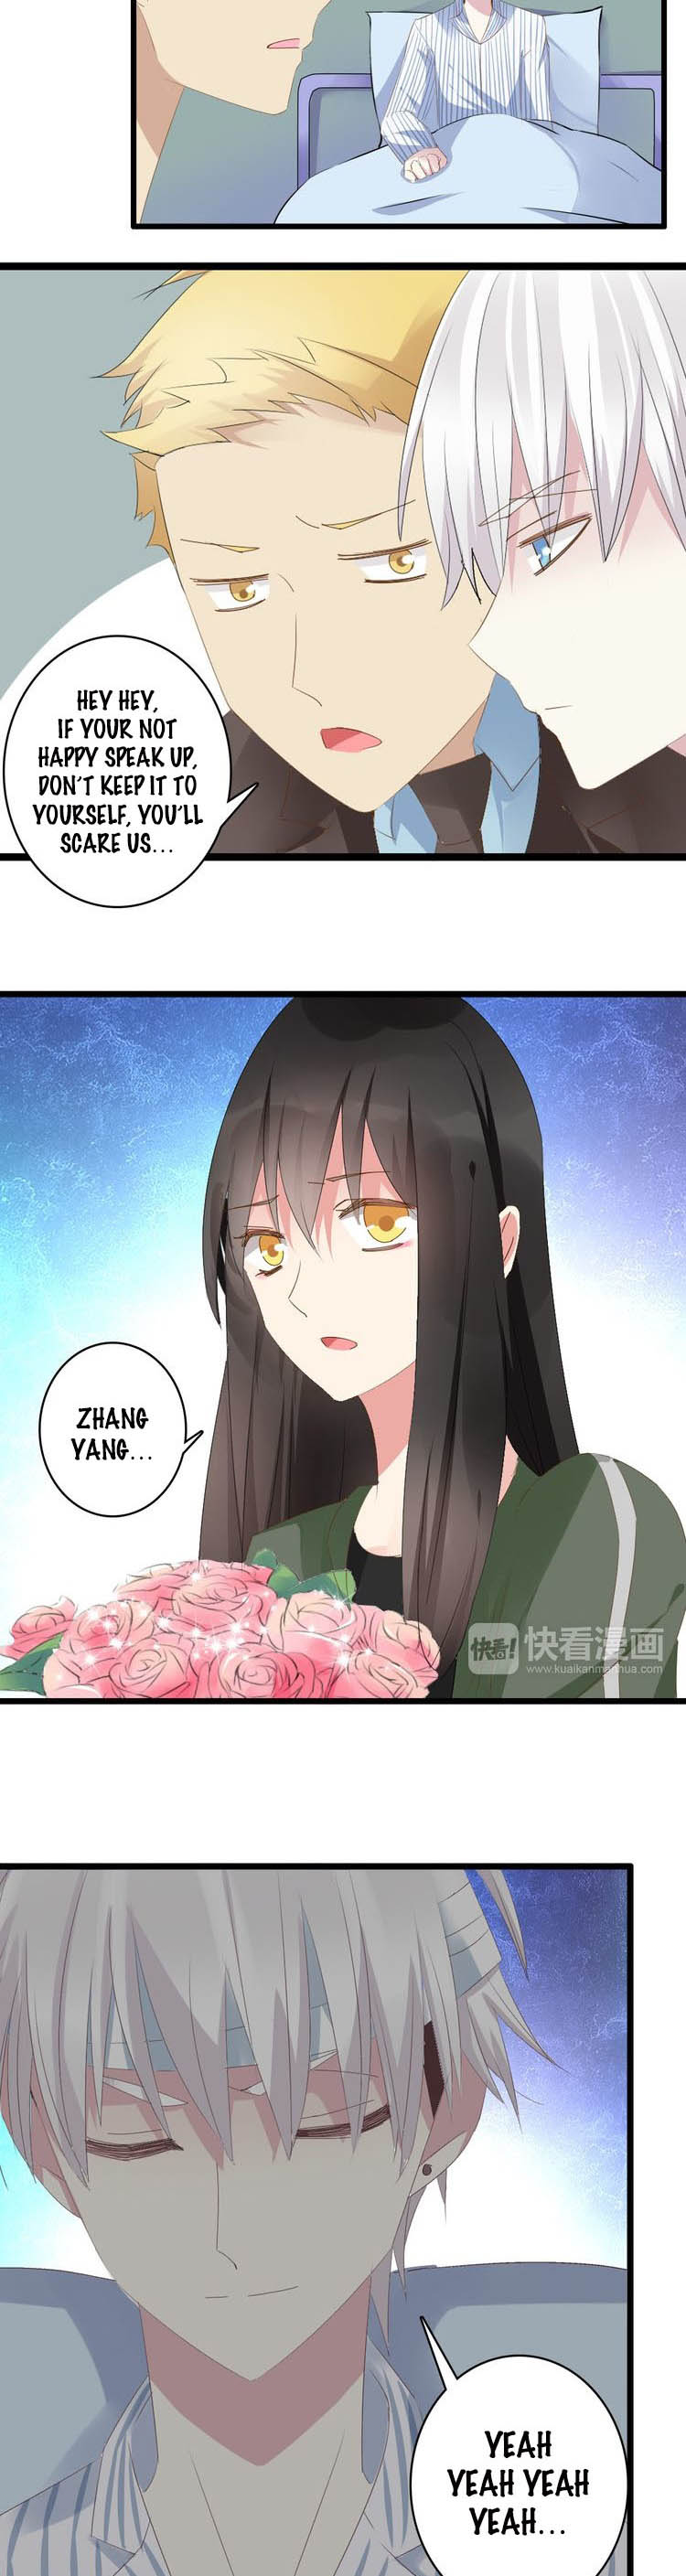 Tall Girls Can Fall In Love Too Ch. 26